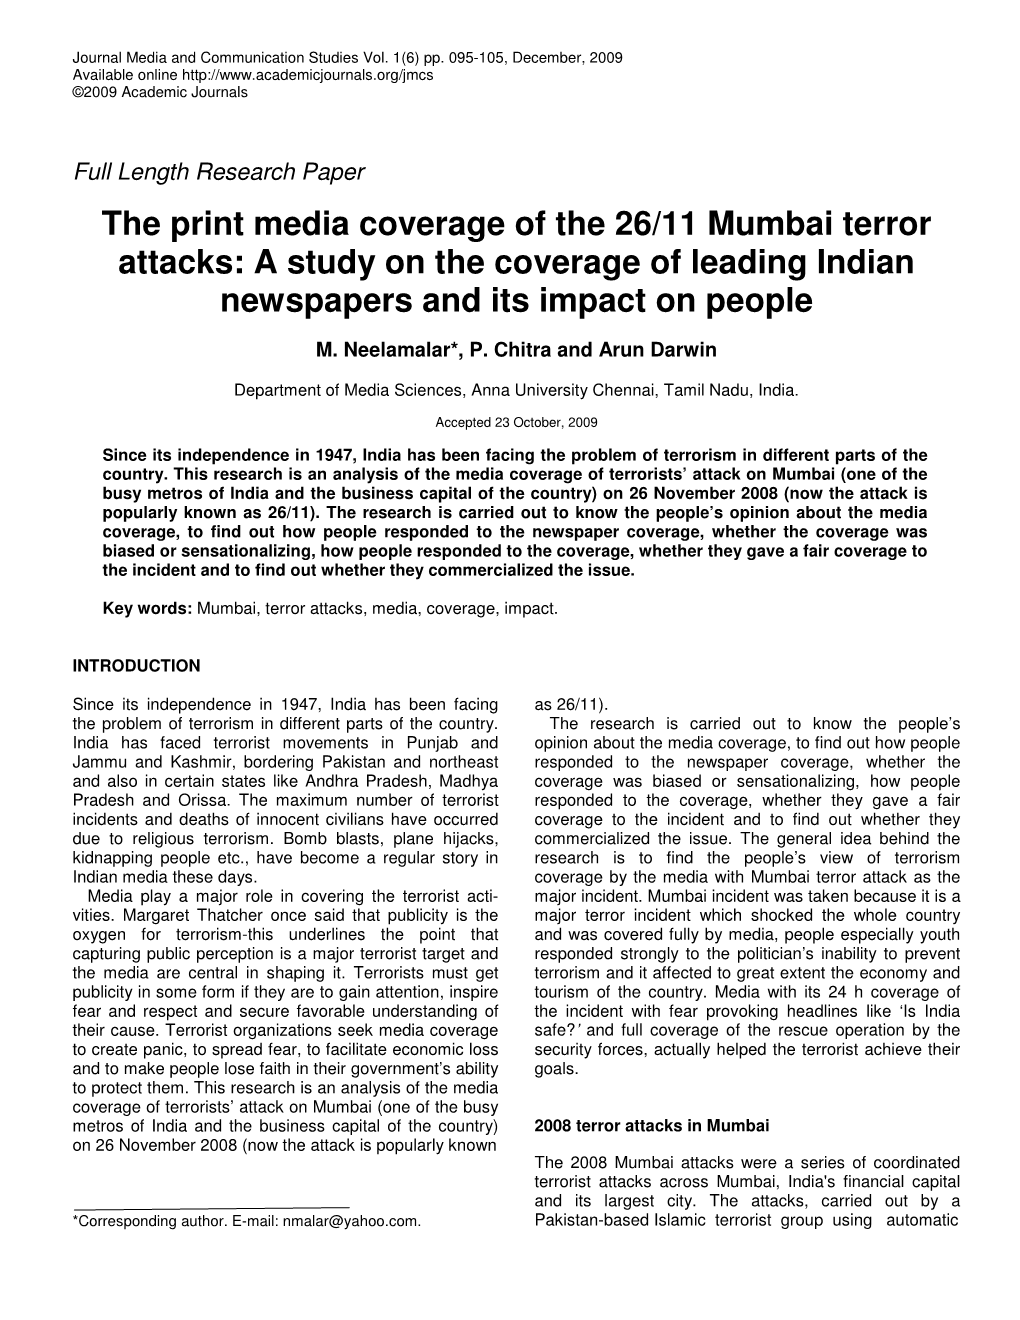 The Print Media Coverage of the 26/11 Mumbai Terror Attacks: a Study on the Coverage of Leading Indian Newspapers and Its Impact on People